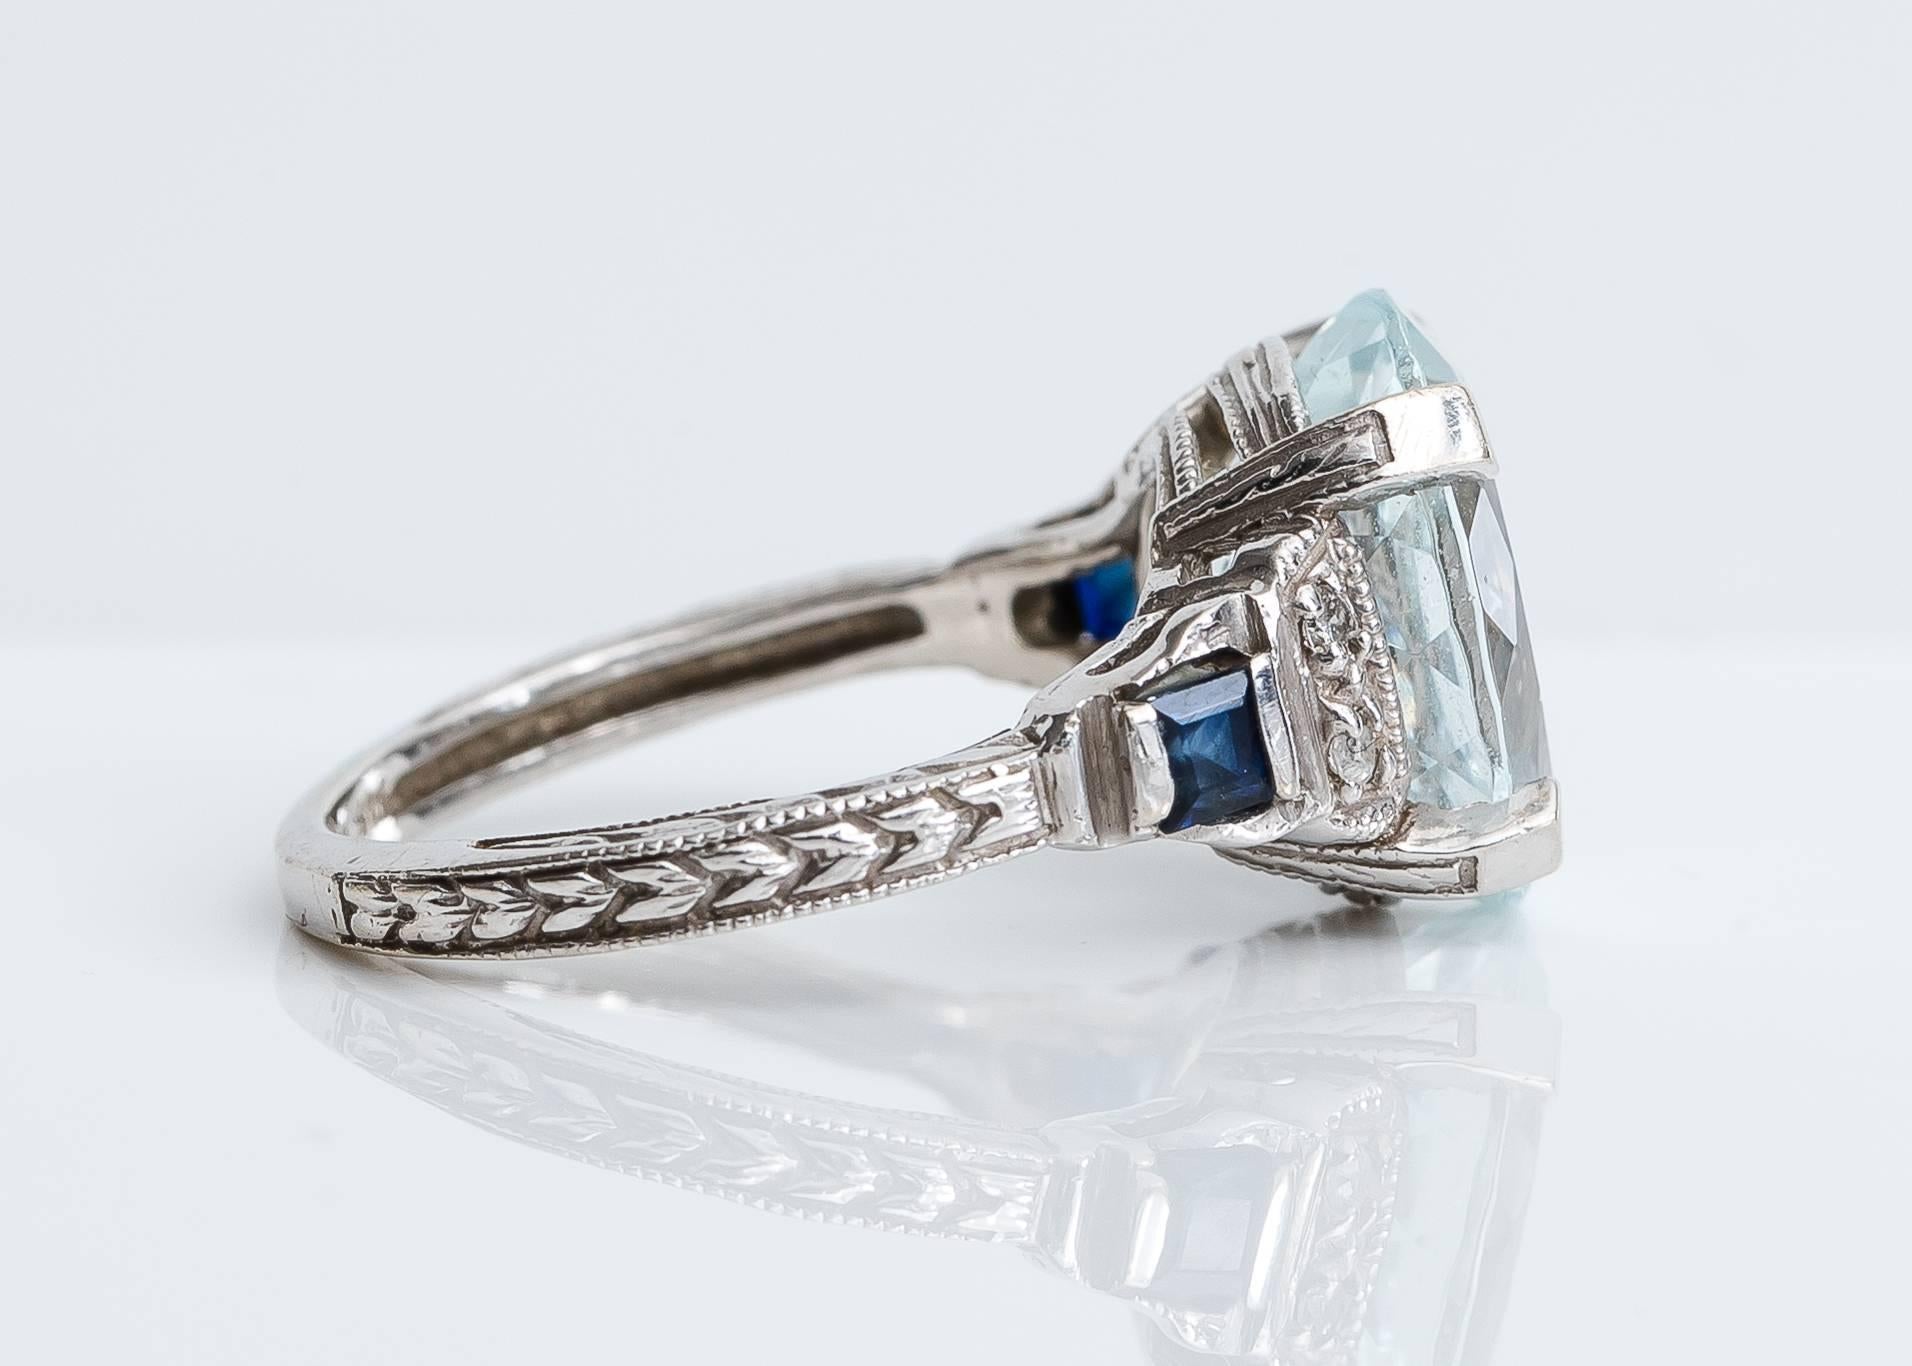 This stunning 1950s Art Nouveau-inspired 3 Carat Aquamarine Ring features a center stone flanked by round brilliant diamonds and square French cut sapphires prong set in 14K White Gold. Delicate patterns adorn the top, bottom and sides of the ring